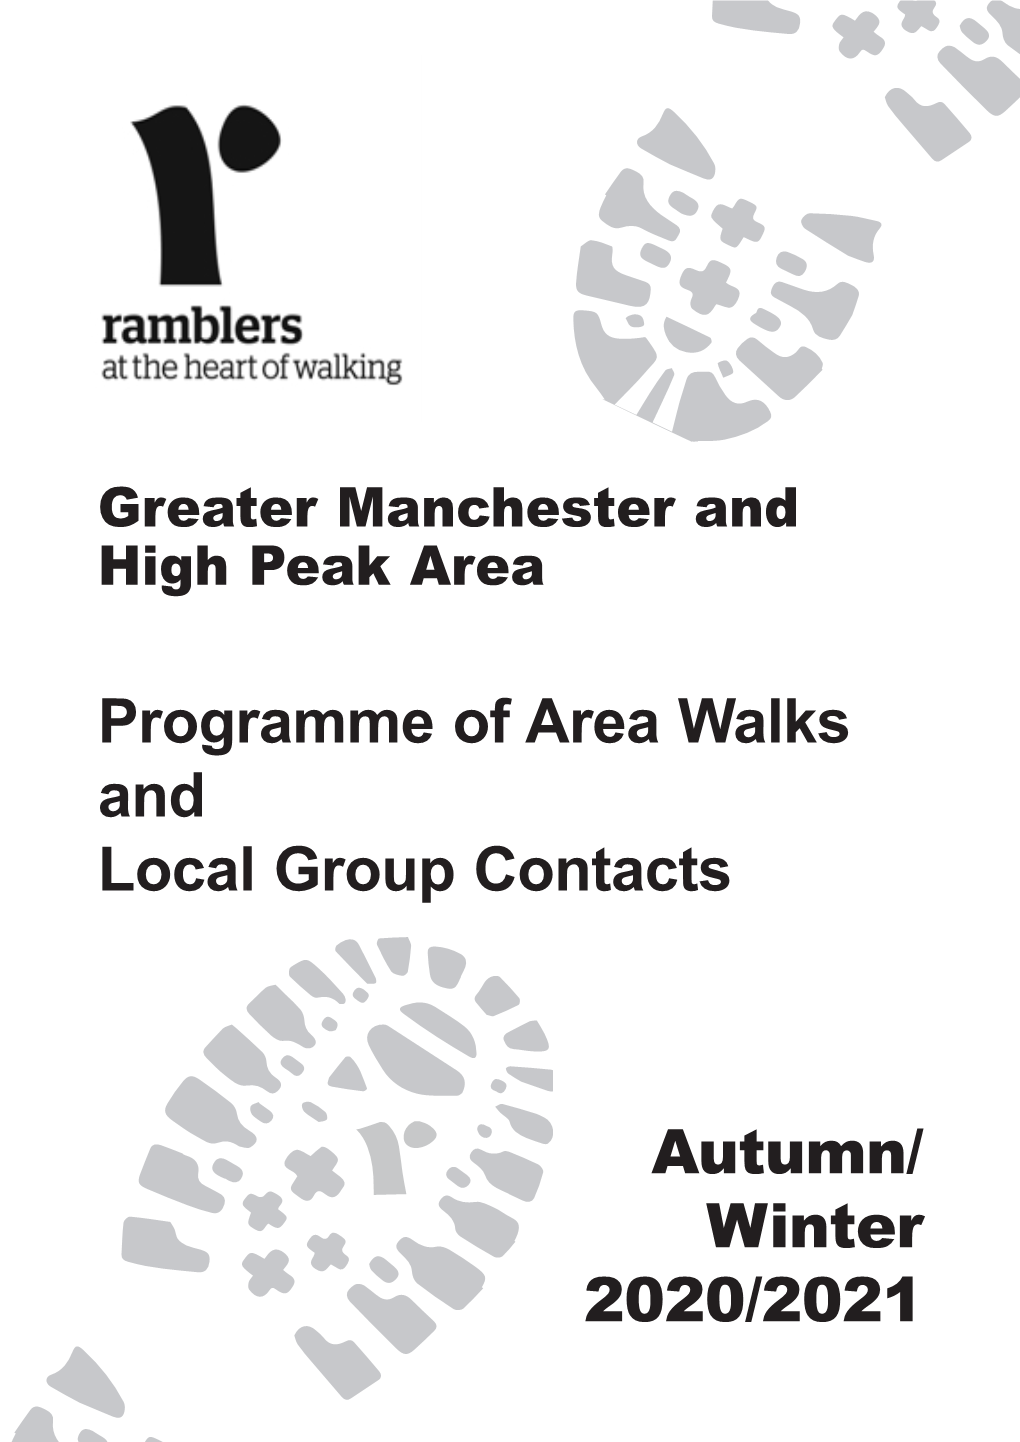 Programme of Area Walks and Local Group Contacts Autumn